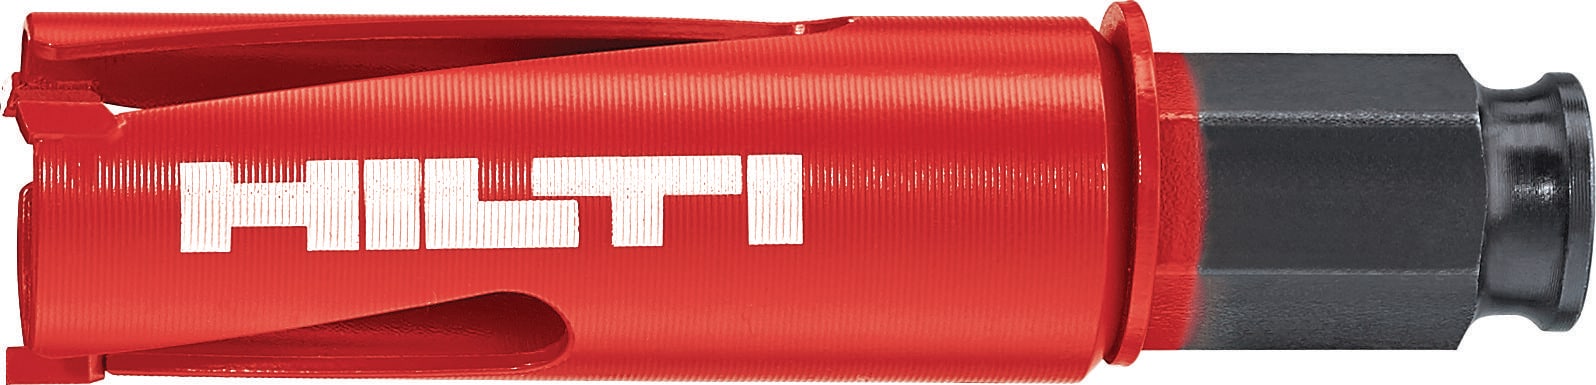 Multipurpose hole saw - Metal and wood drill bits - Hilti Finland